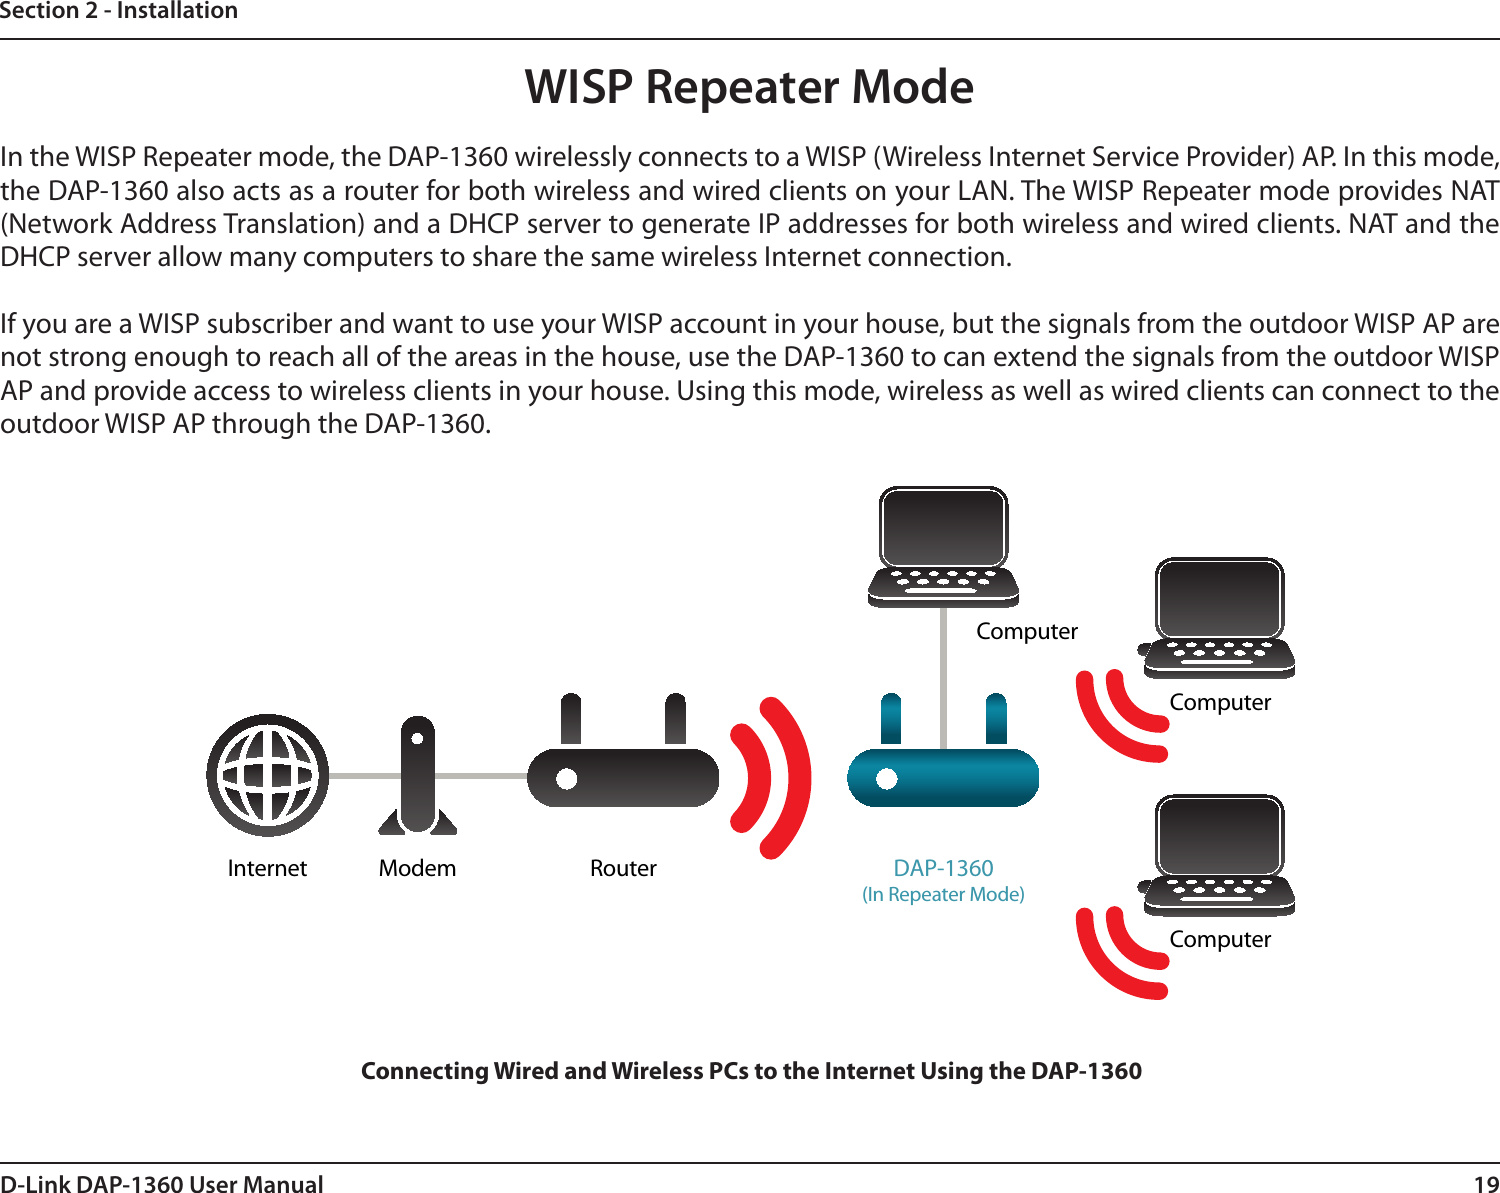 19D-Link DAP-1360 User ManualSection 2 - InstallationWISP Repeater ModeIn the WISP Repeater mode, the DAP-1360 wirelessly connects to a WISP (Wireless Internet Service Provider) AP. In this mode, the DAP-1360 also acts as a router for both wireless and wired clients on your LAN. The WISP Repeater mode provides NAT (Network Address Translation) and a DHCP server to generate IP addresses for both wireless and wired clients. NAT and the DHCP server allow many computers to share the same wireless Internet connection.If you are a WISP subscriber and want to use your WISP account in your house, but the signals from the outdoor WISP AP are not strong enough to reach all of the areas in the house, use the DAP-1360 to can extend the signals from the outdoor WISP AP and provide access to wireless clients in your house. Using this mode, wireless as well as wired clients can connect to the outdoor WISP AP through the DAP-1360.ComputerInternet Modem Router DAP-1360(In Repeater Mode)ComputerComputerConnecting Wired and Wireless PCs to the Internet Using the DAP-1360